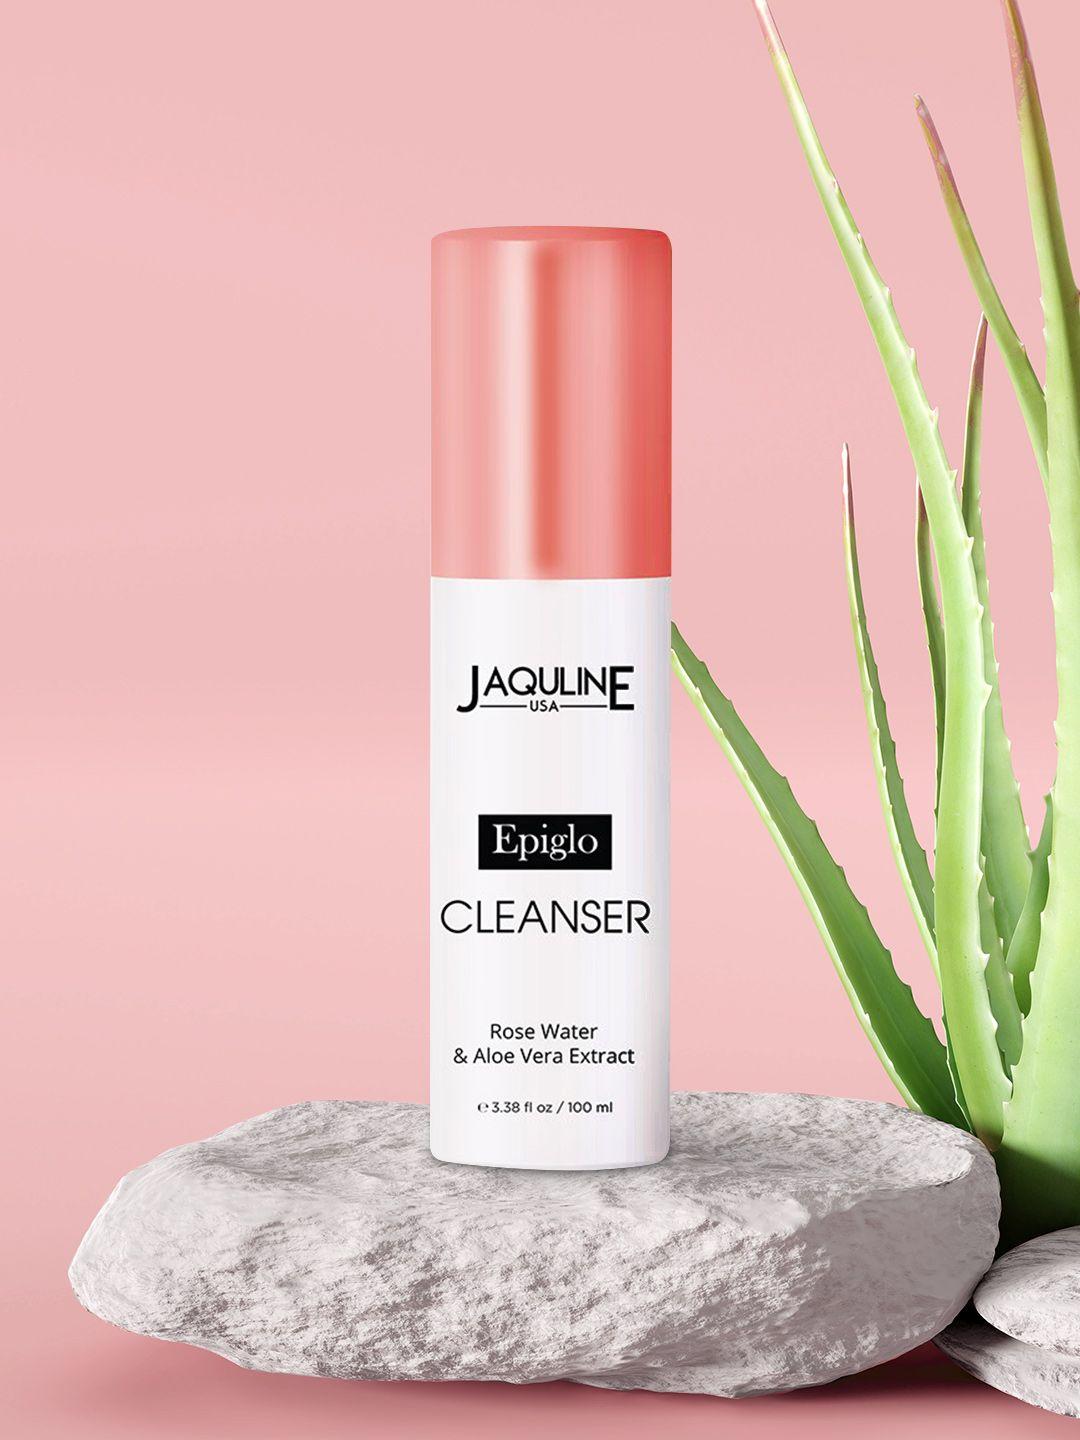 jaquline usa epiglo oily face paraben free cleanser 100ml